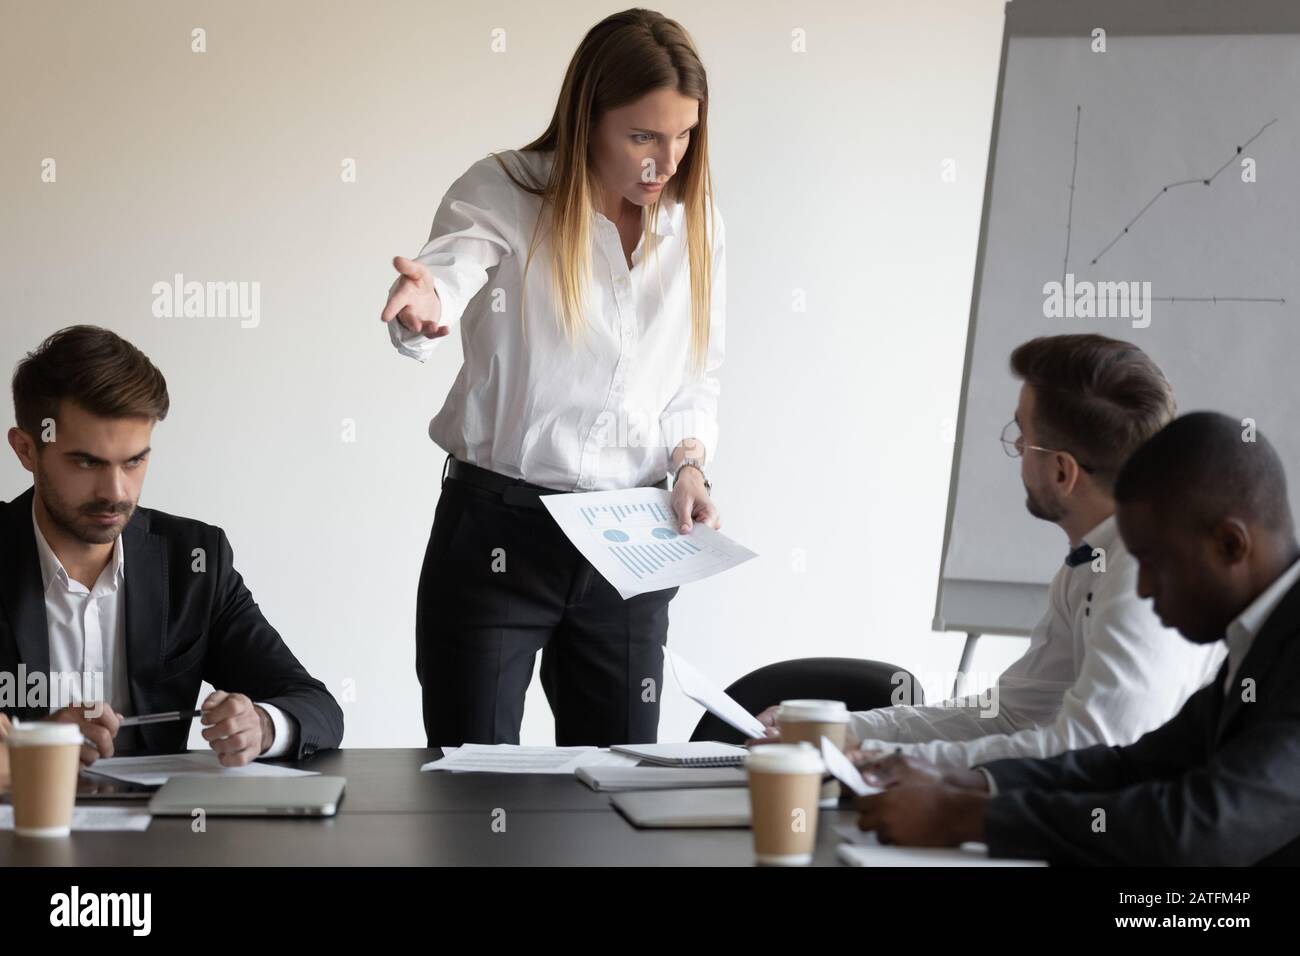 Female boss and employee having conflict during meeting in boardroom Stock Photo